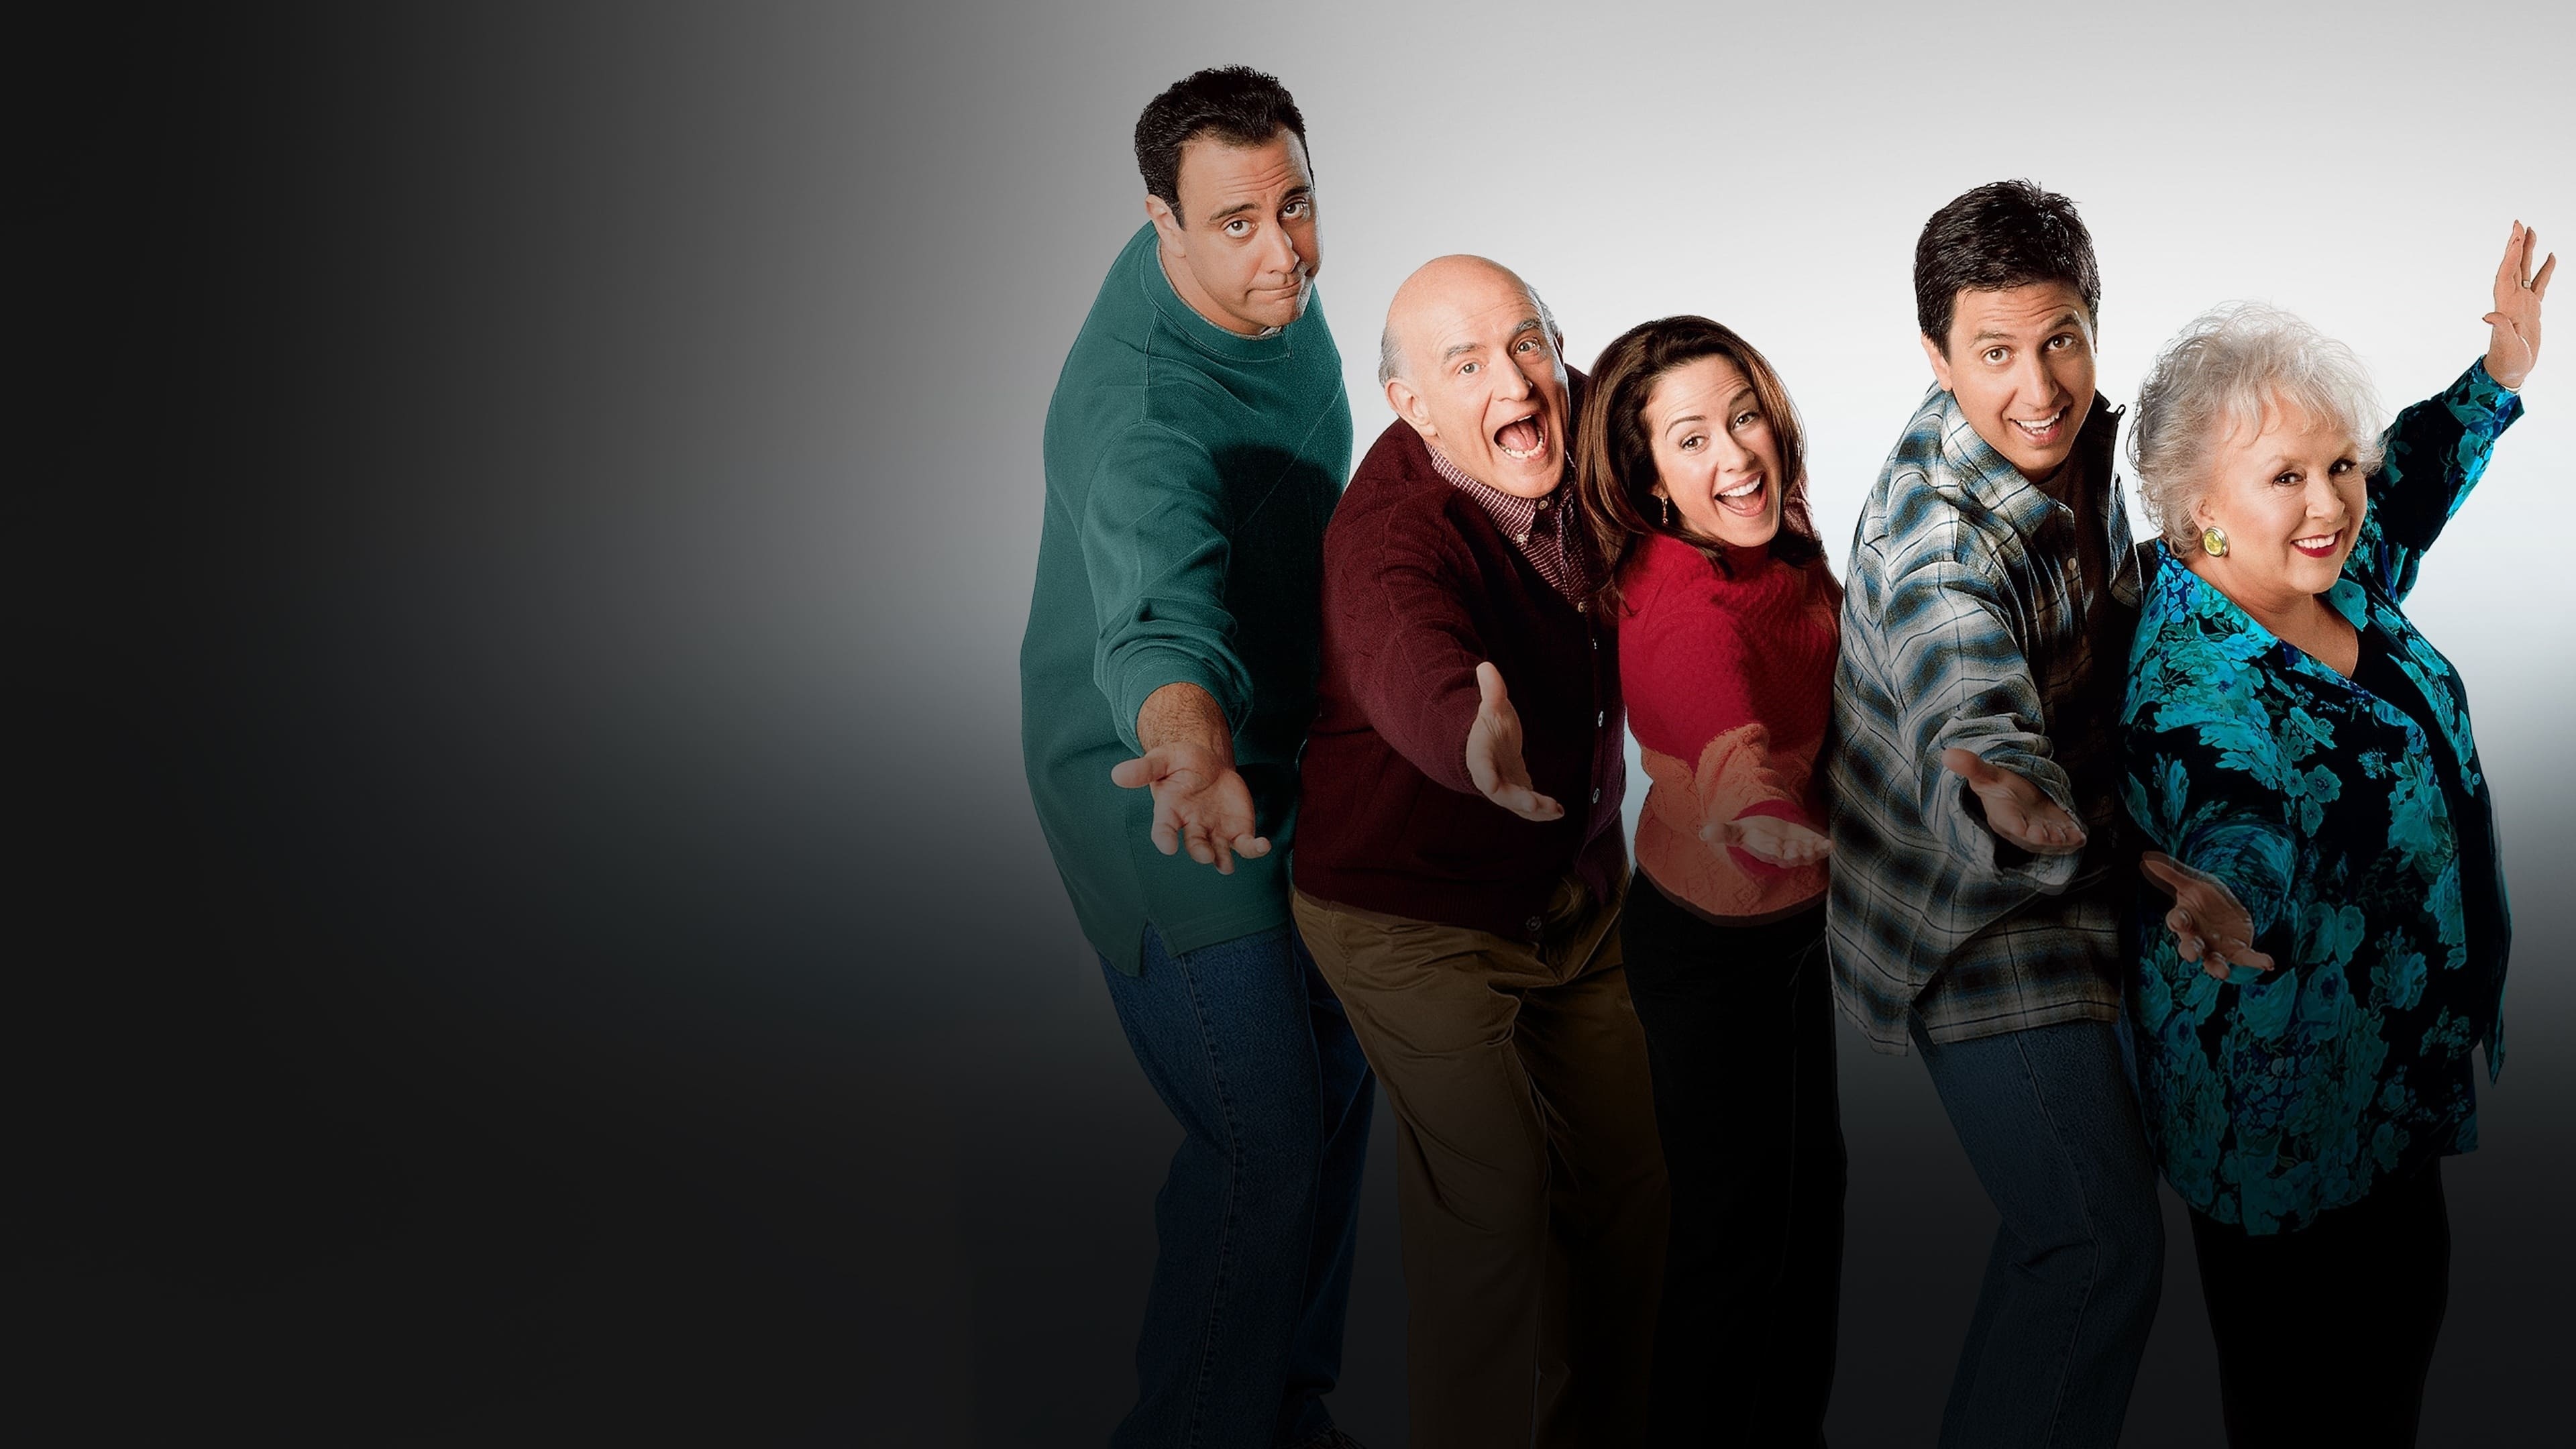 Everybody Loves Raymond, Sarcastic wit, Family dynamics, Quirky characters, 3840x2160 4K Desktop